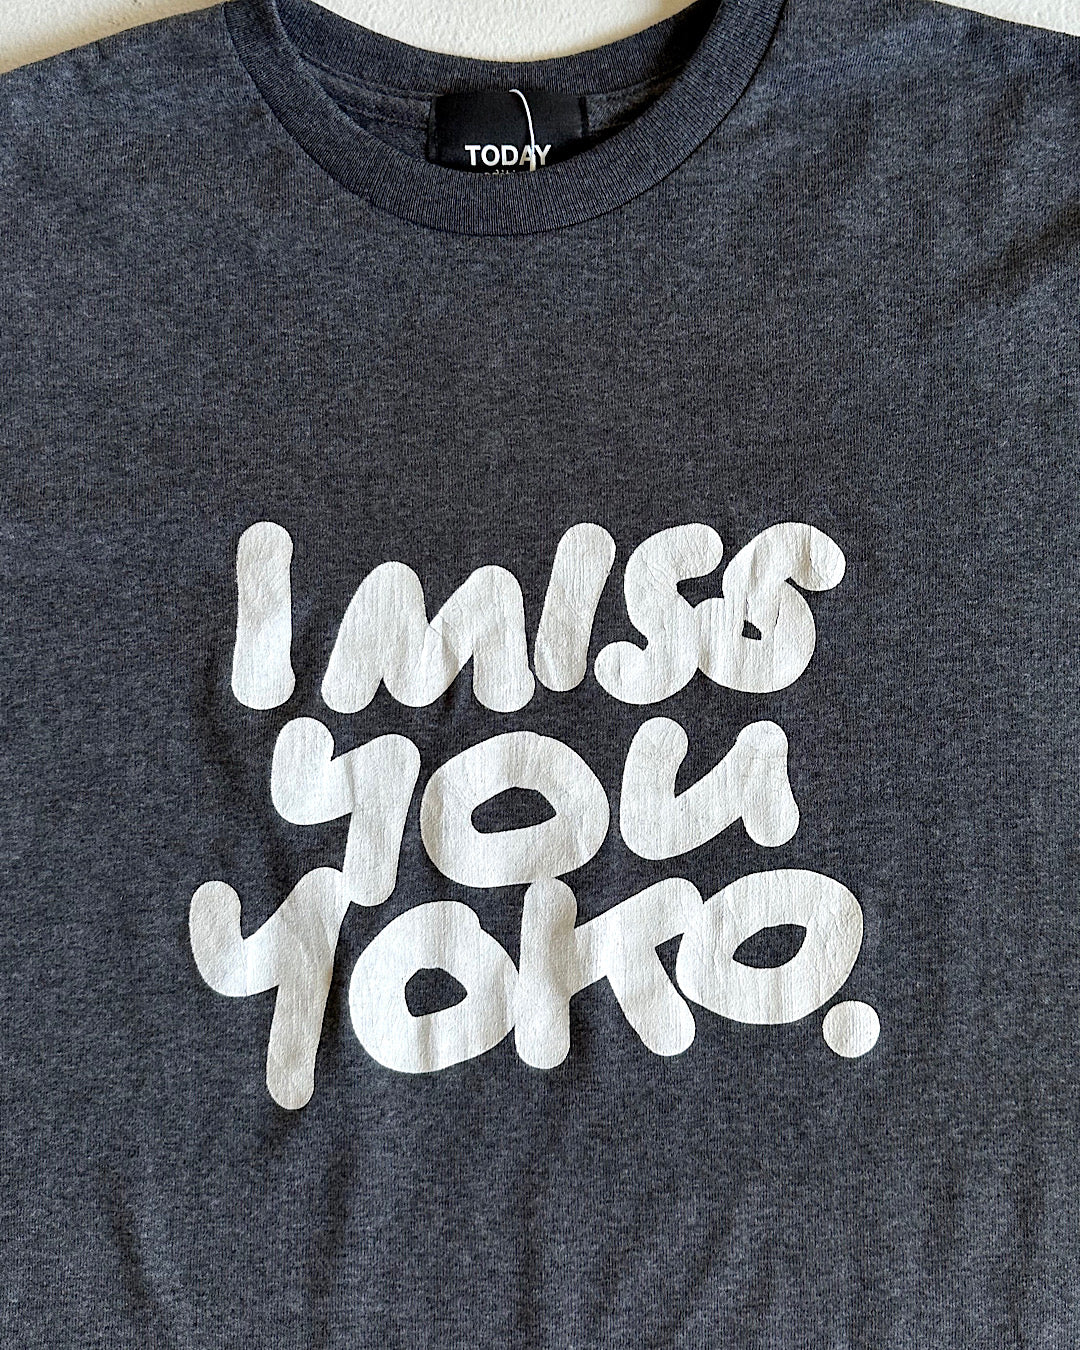 TODAY edition / I miss you yoko SS Tee - CHARCOAL